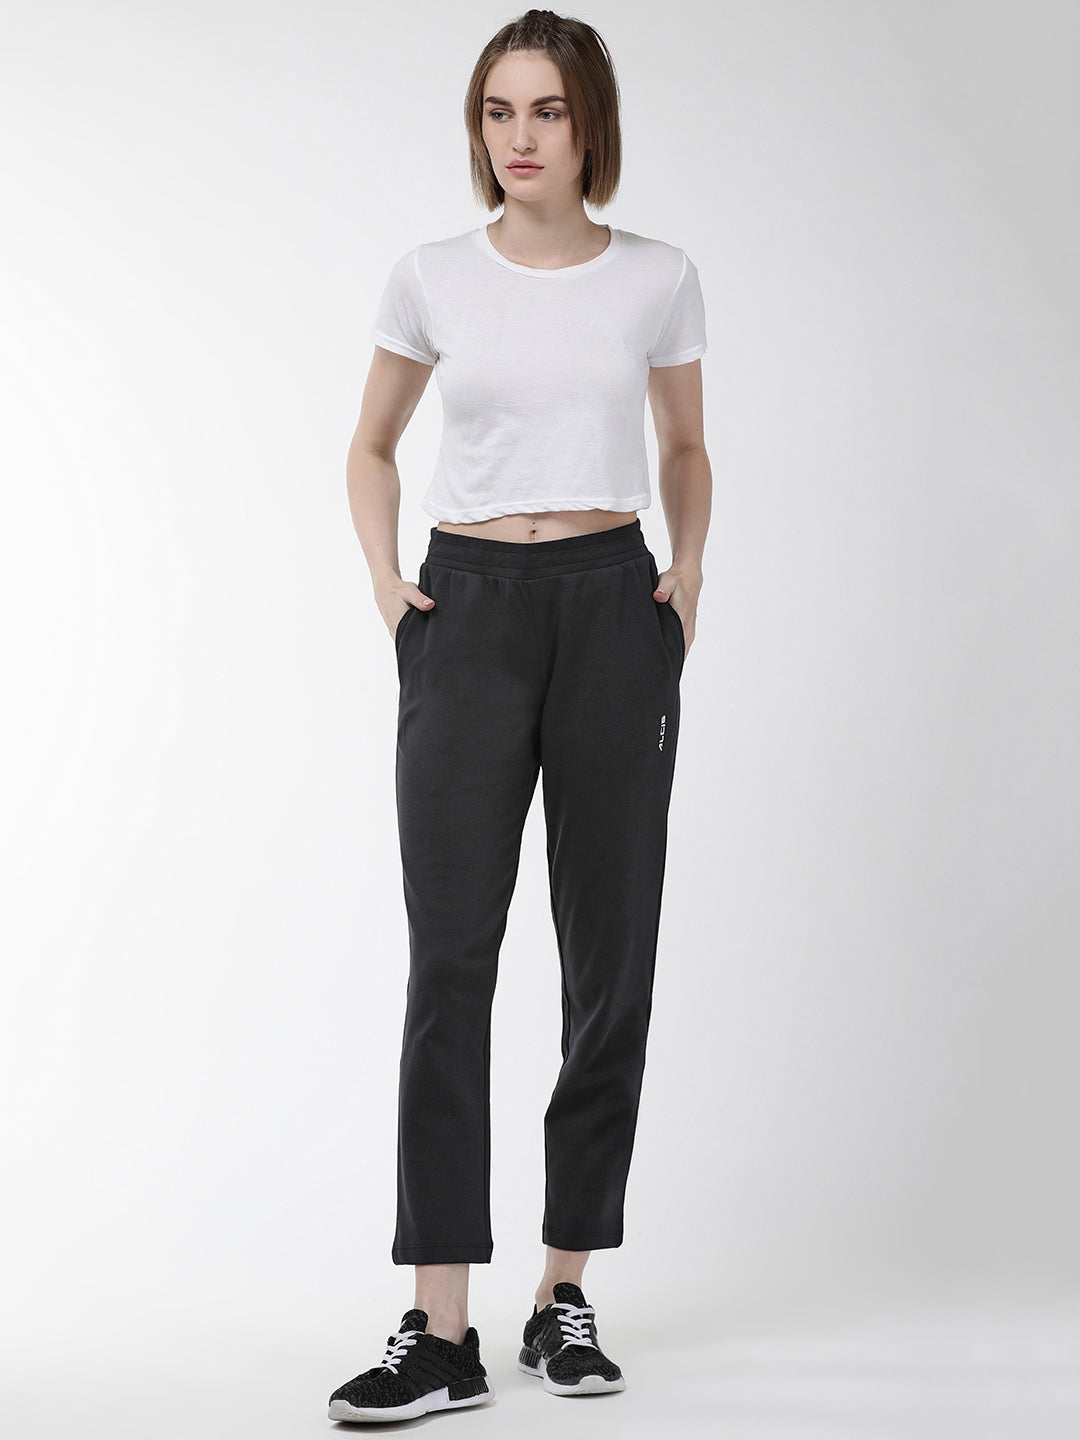 Alcis Women Black Solid Cropped Training Track Pants ALRWPN03-S